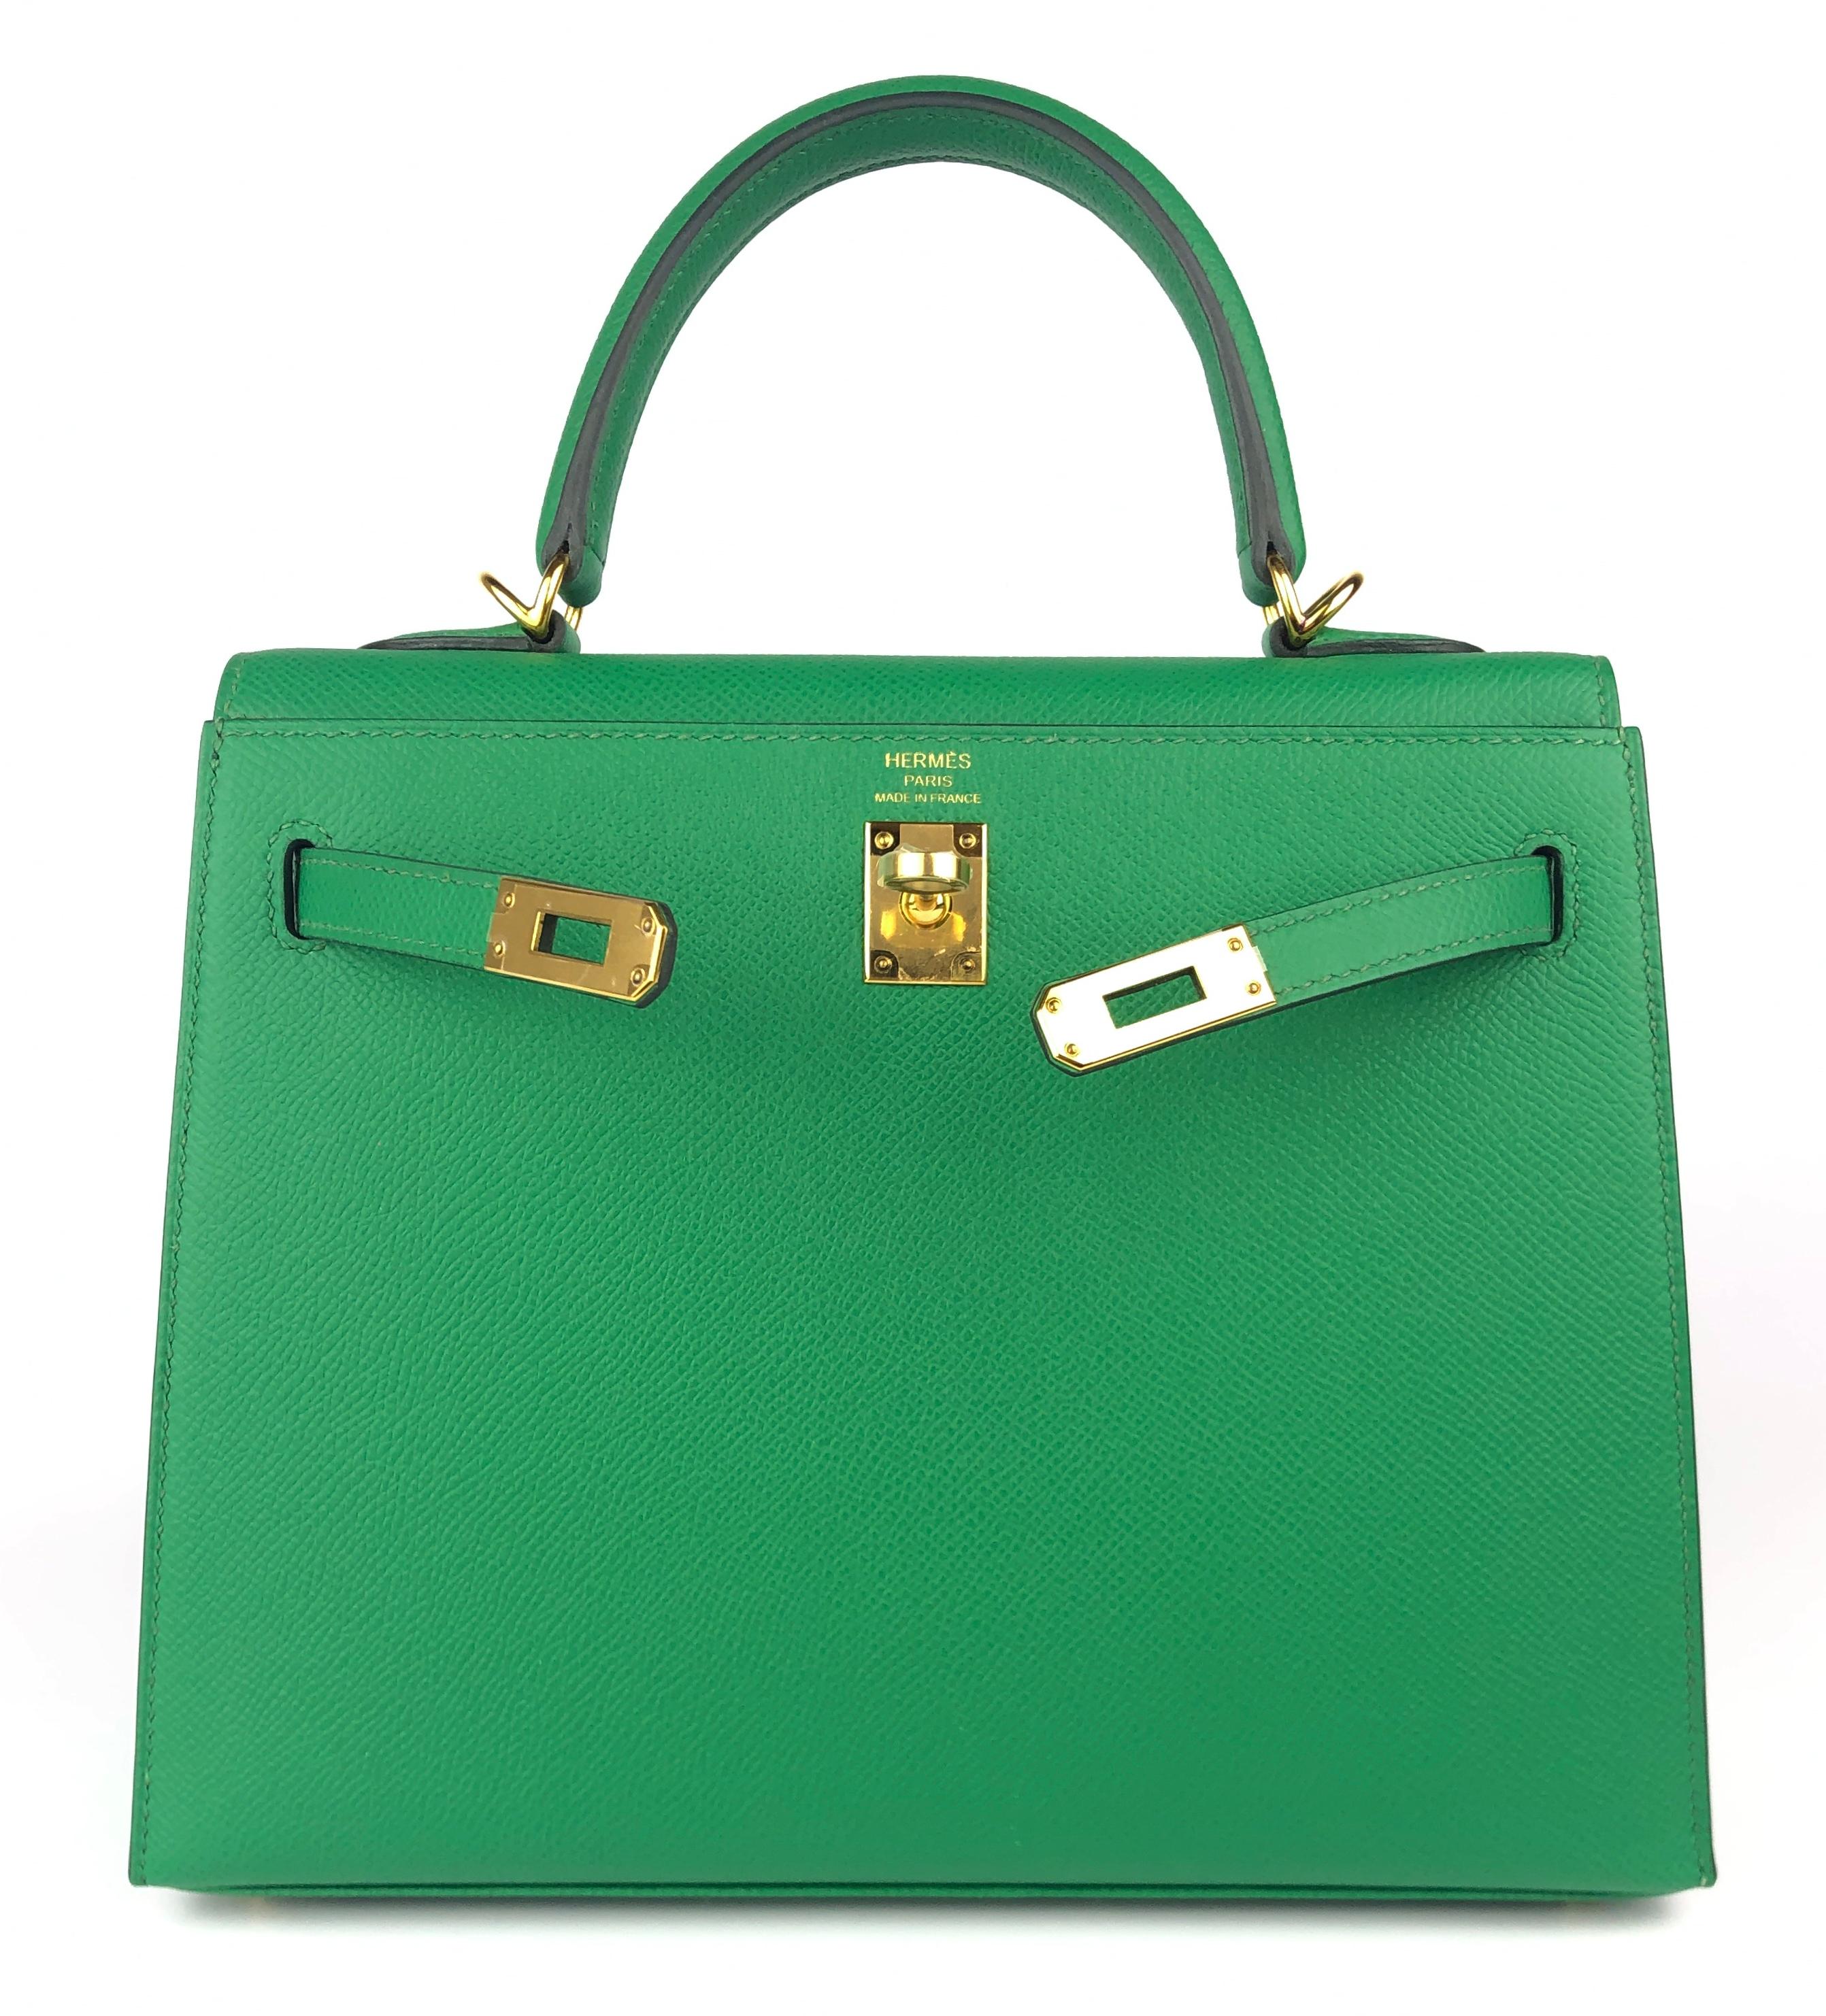 Beautiful Hermes Kelly 25 Sellier Cactus Epsom Leather. Complimented by Gold Hardware. Pristine Condition Almost Like New with Plastic on all Hardware and feet. 2019 D Stamp. 

Shop with Confidence from Lux. Addicts. Authenticity Guaranteed!